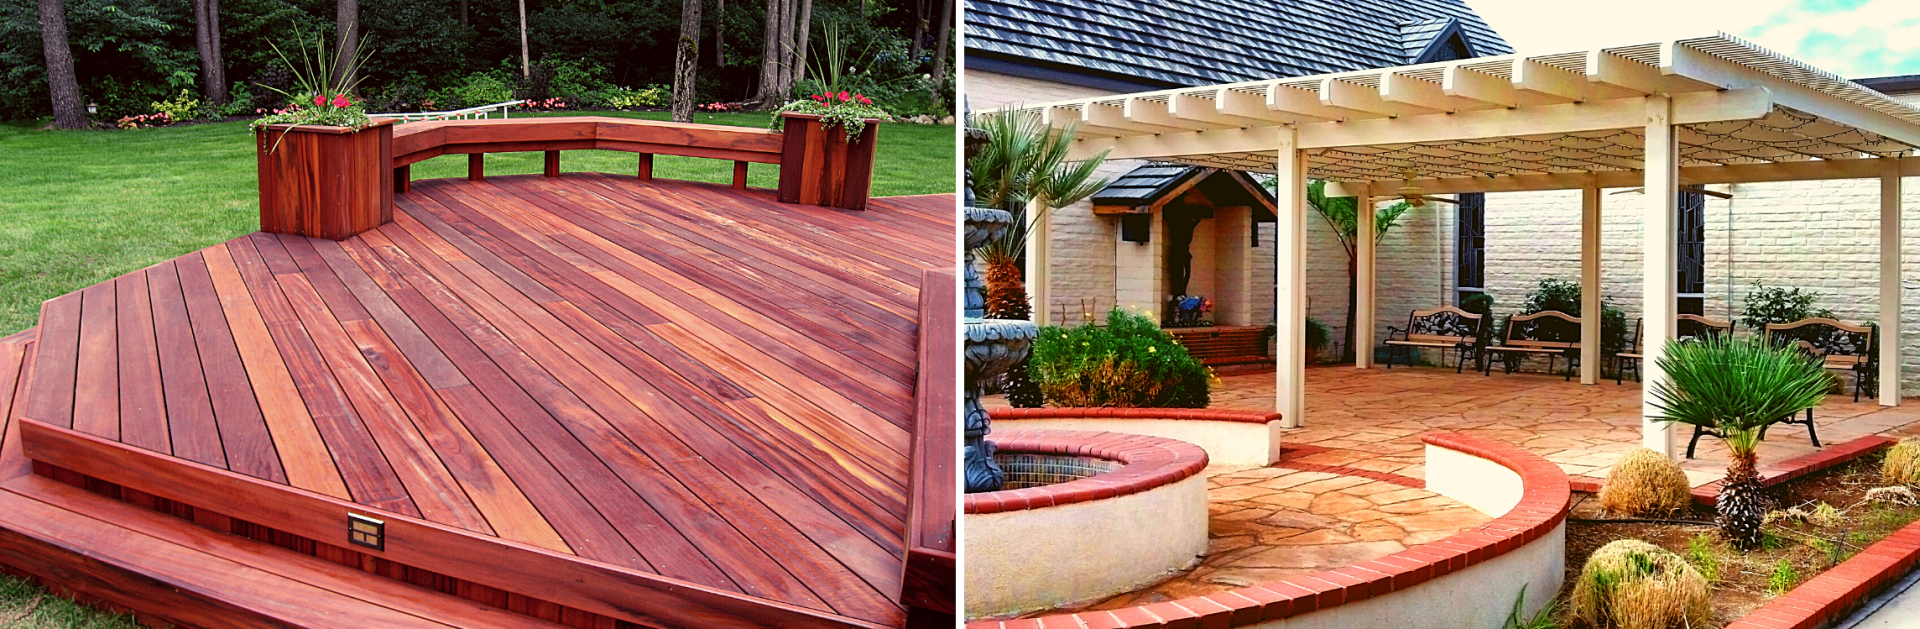 Wood Deck Compared in a Backyard to Stone Patio with White Patio Covers